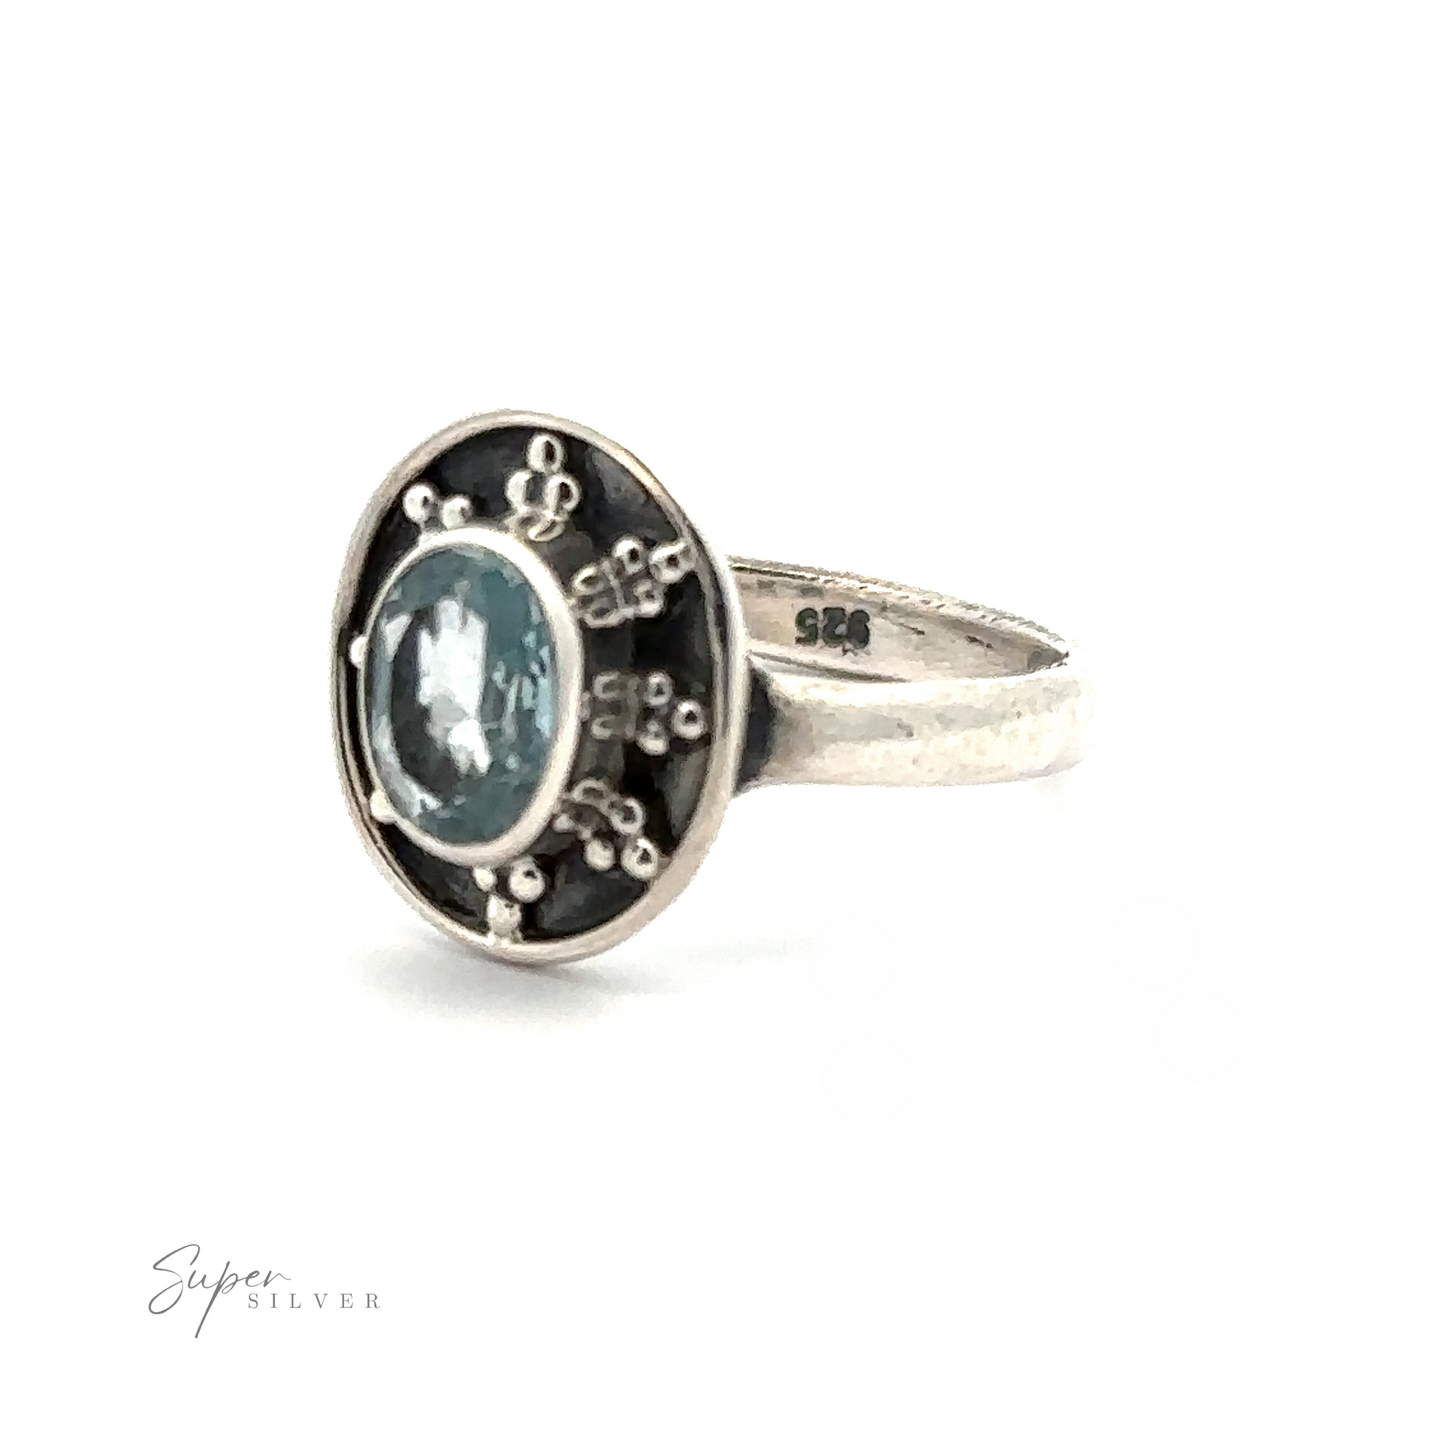 
                  
                    An Oval Gemstone Ring with Ball and Disk Border with a blue gemstone at its center, surrounded by small, intricate designs on a dark background. This vintage-inspired jewelry piece features an inside band inscribed with "925.
                  
                